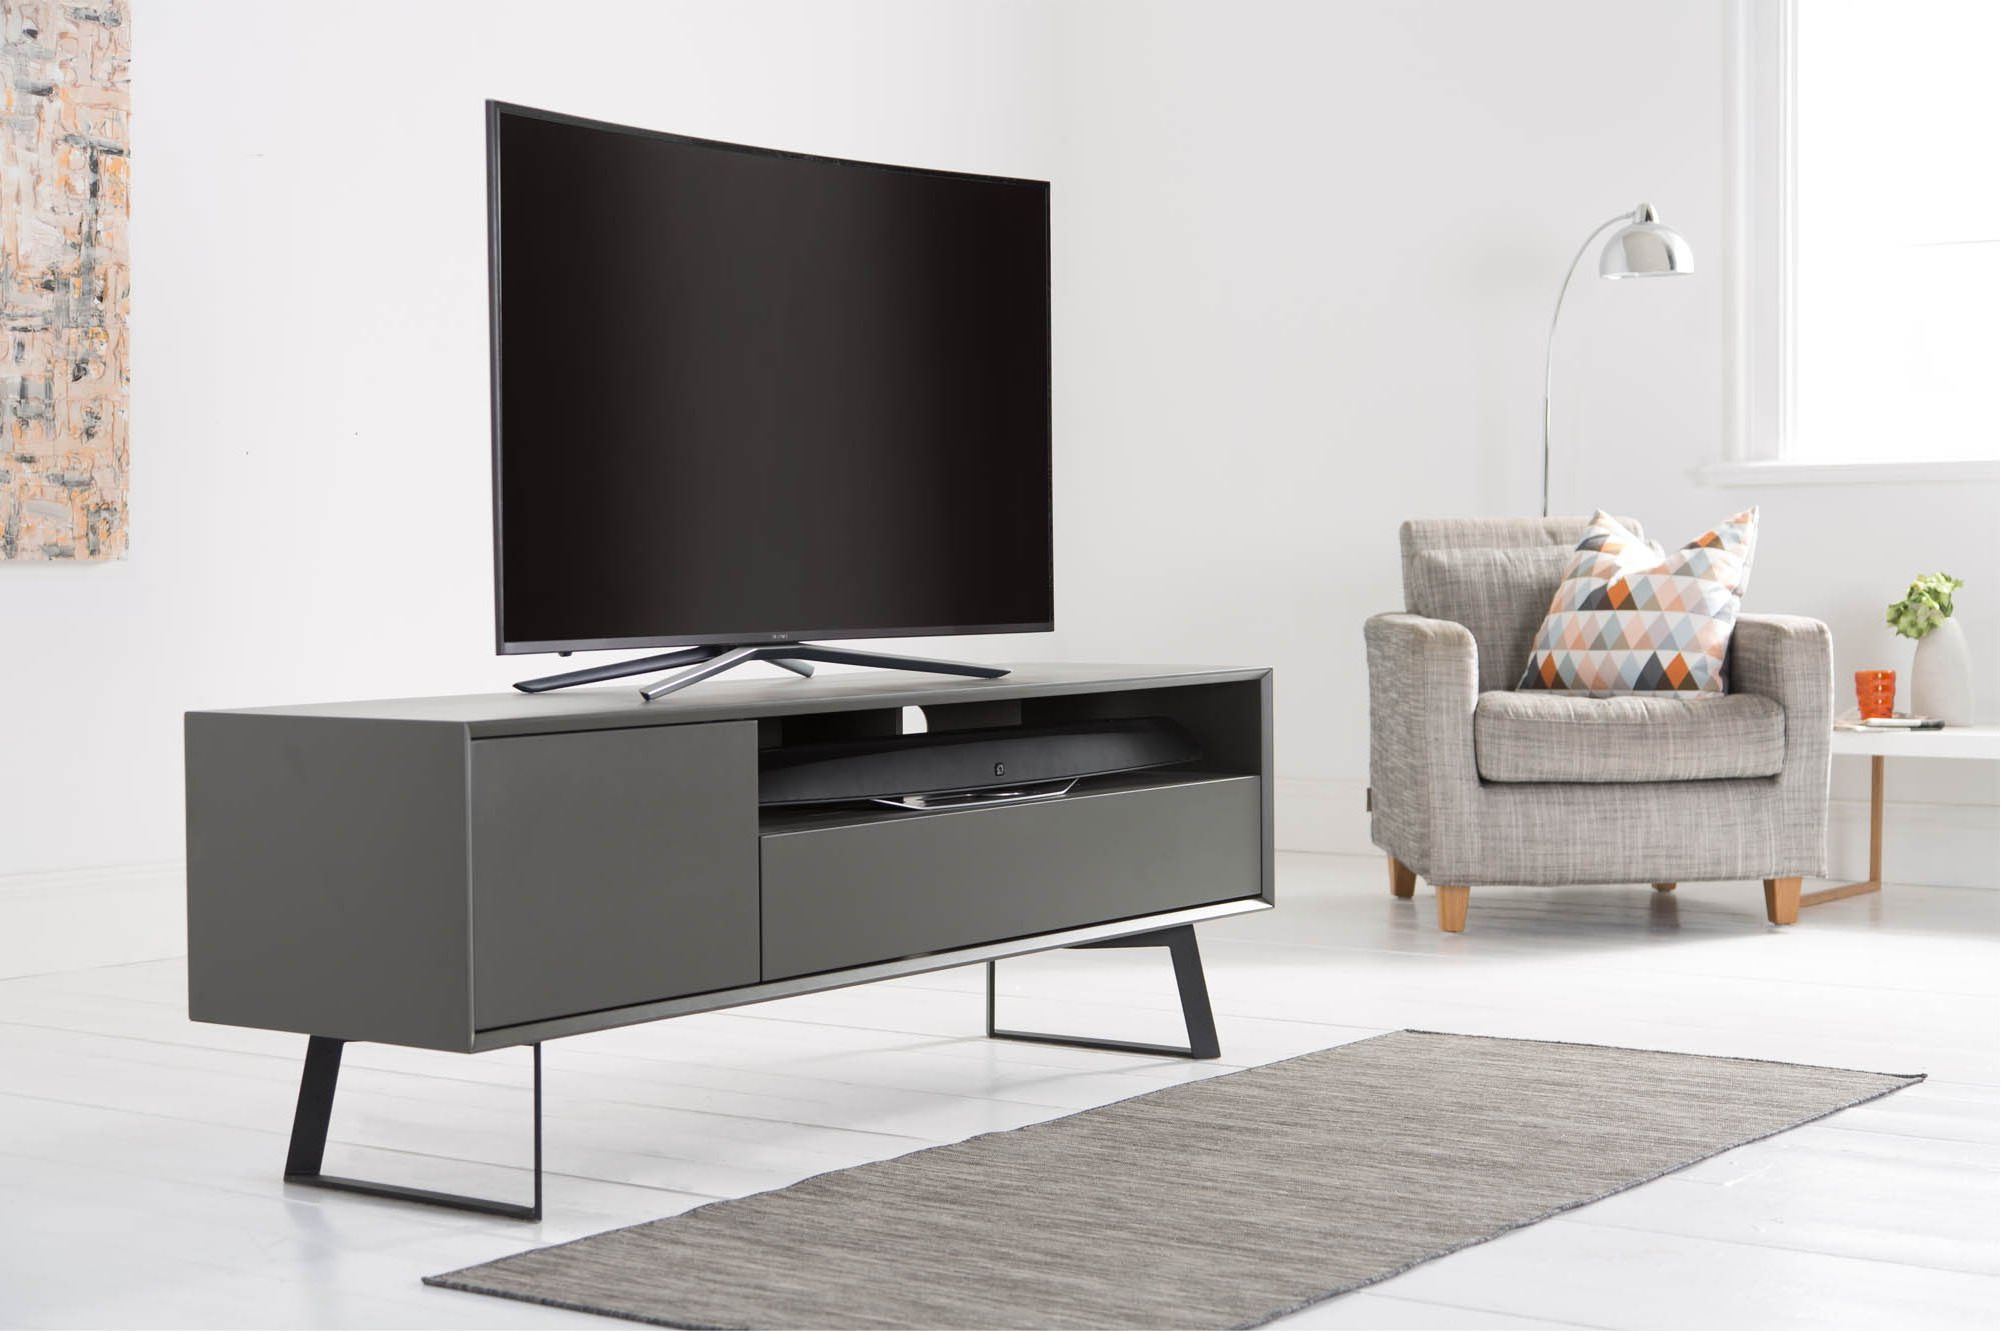 Alphason Adca1600 Gry Carbon 1600 Black And Grey Tv Stand With Regard To Carbon Wide Tv Stands (Gallery 13 of 20)